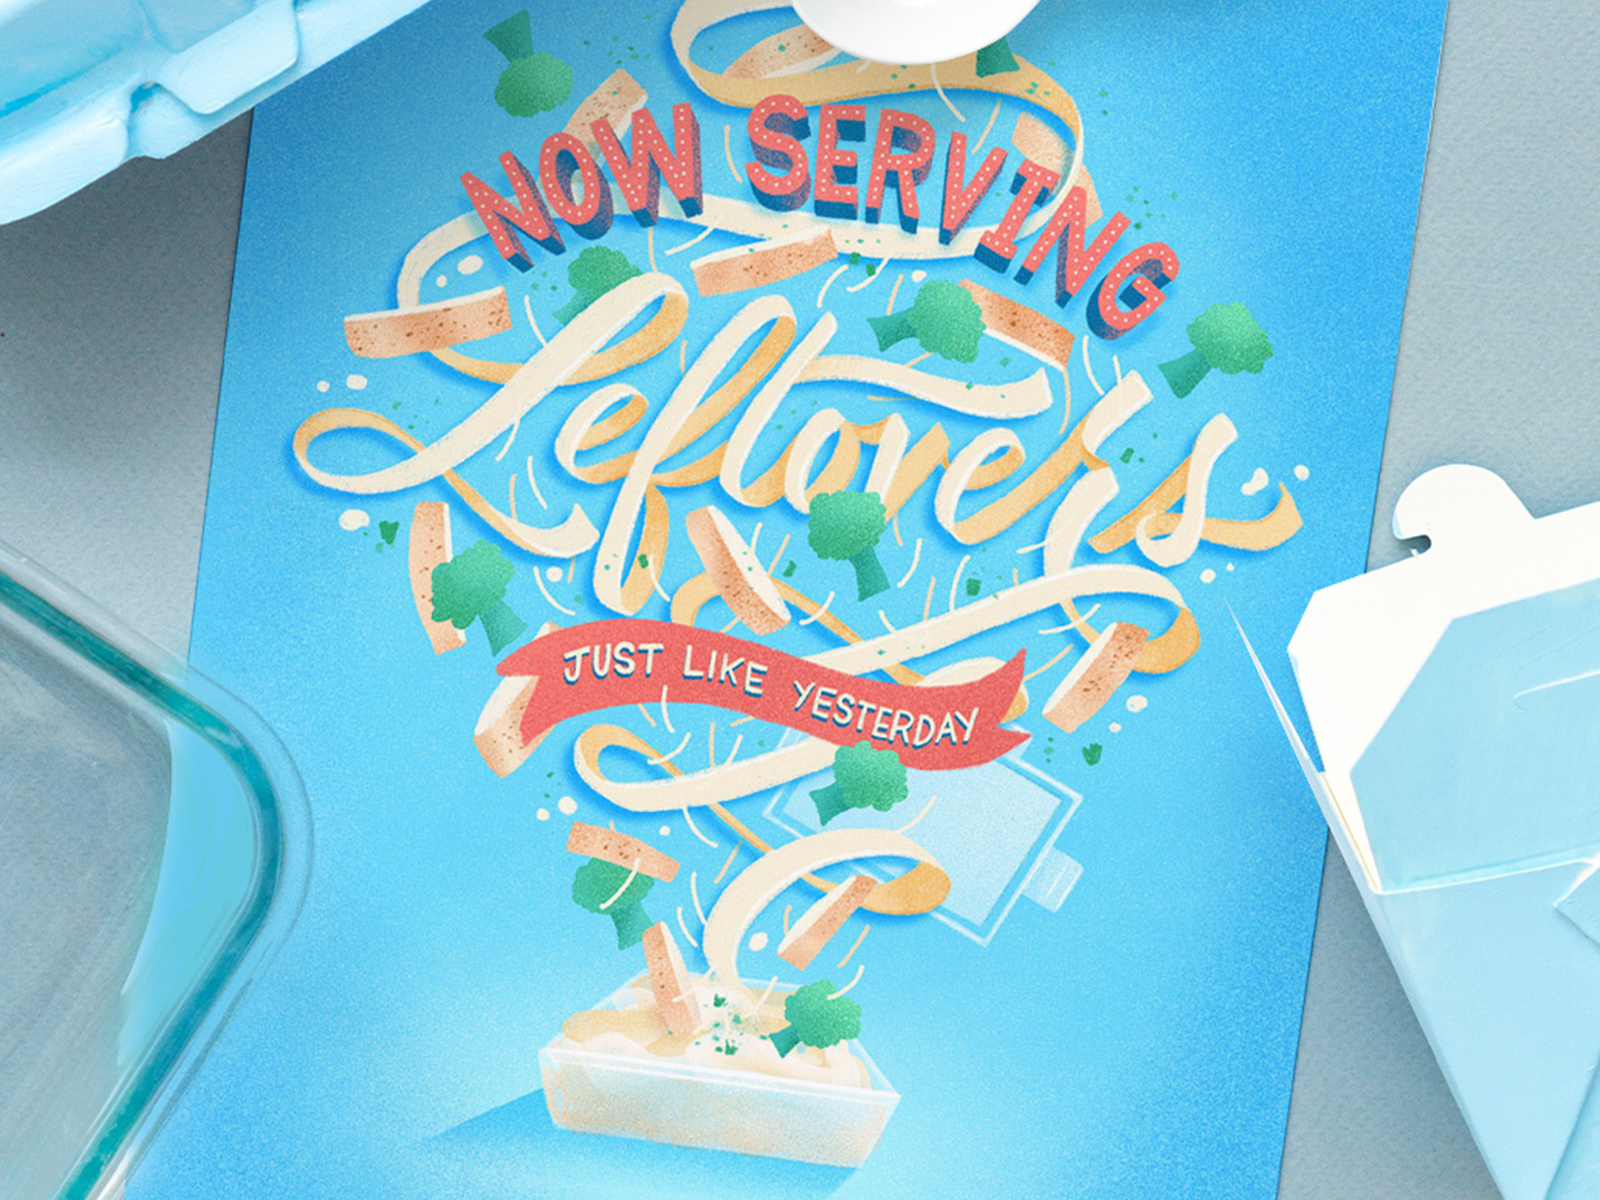 Now Serving Leftovers (Just Like Yesterday) dimensional type alfredo noodles food illustration illustration procreate letters food type food lettering food typography hand lettering lettering